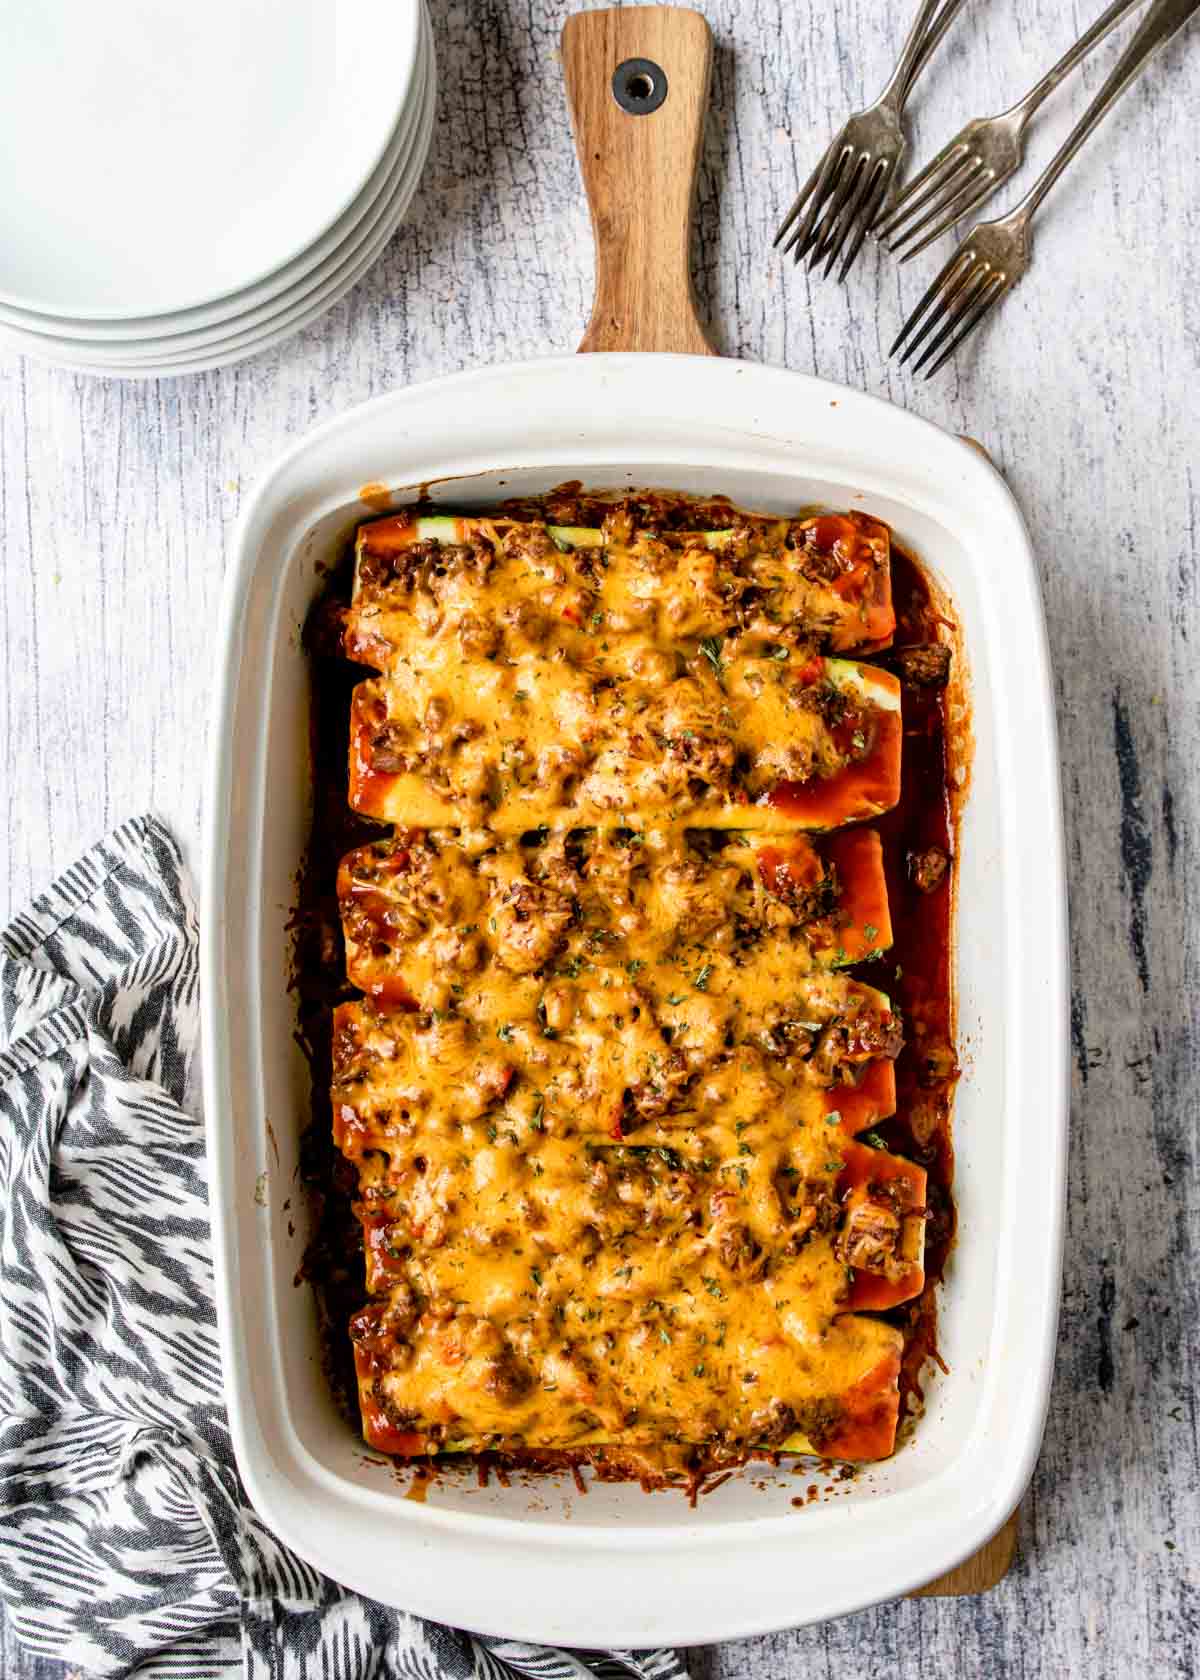 a casserole dish with enchiladas make with zucchinis